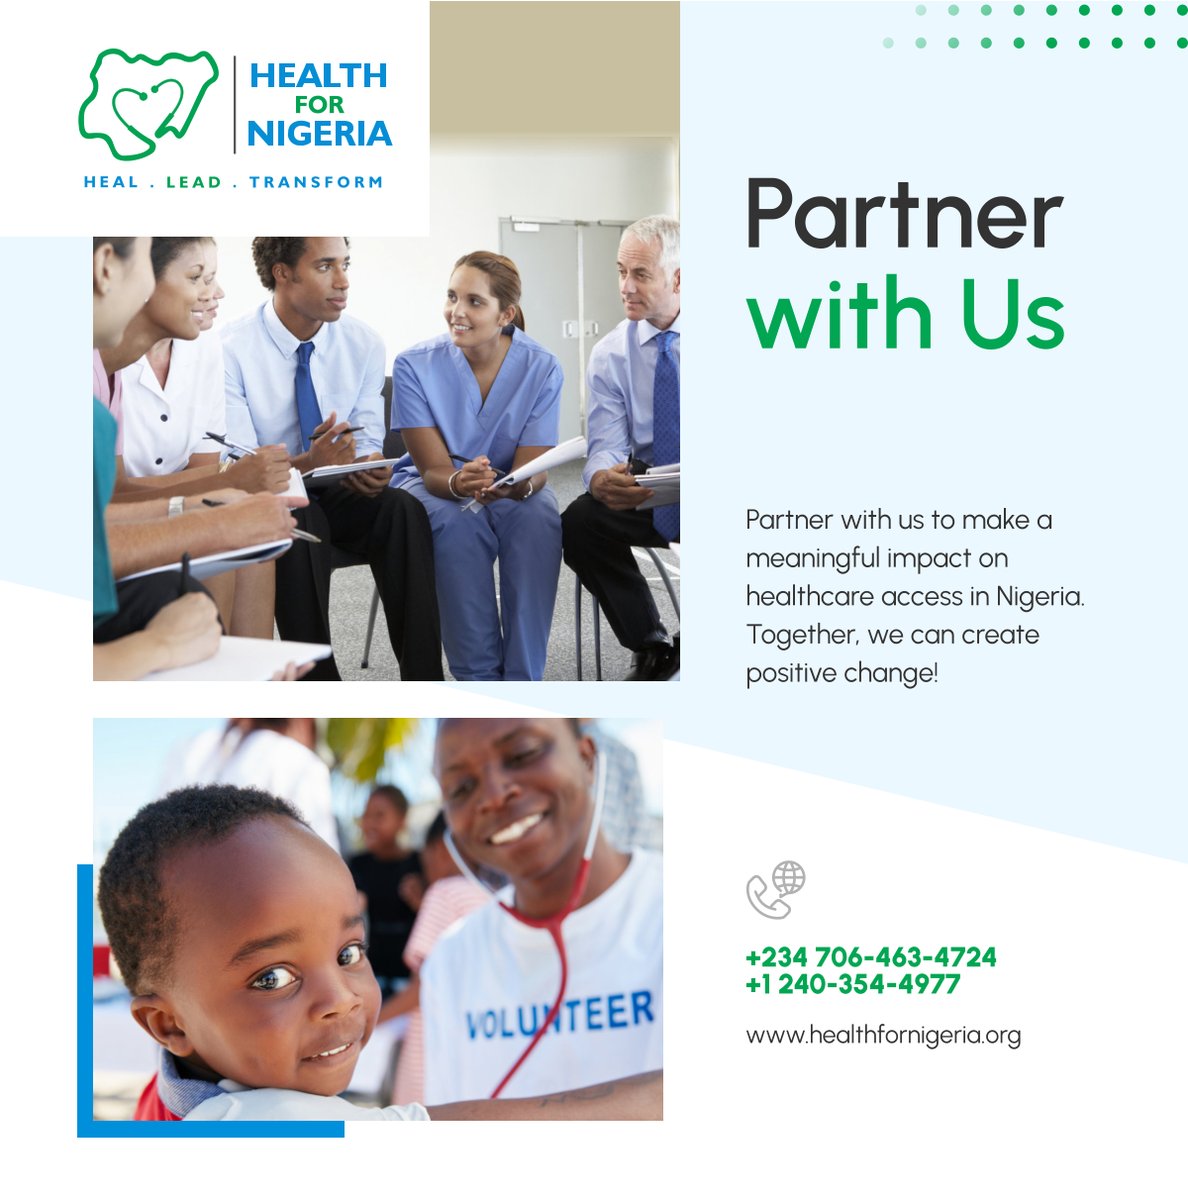 Join us in our mission to improve healthcare access for all Nigerians. Partner with us today! Contact us at +234 706-463-4724 or +1 240-354-4977 to learn how. 

#LagosNigeria #HealthcareAccess #NonProfitOrganization